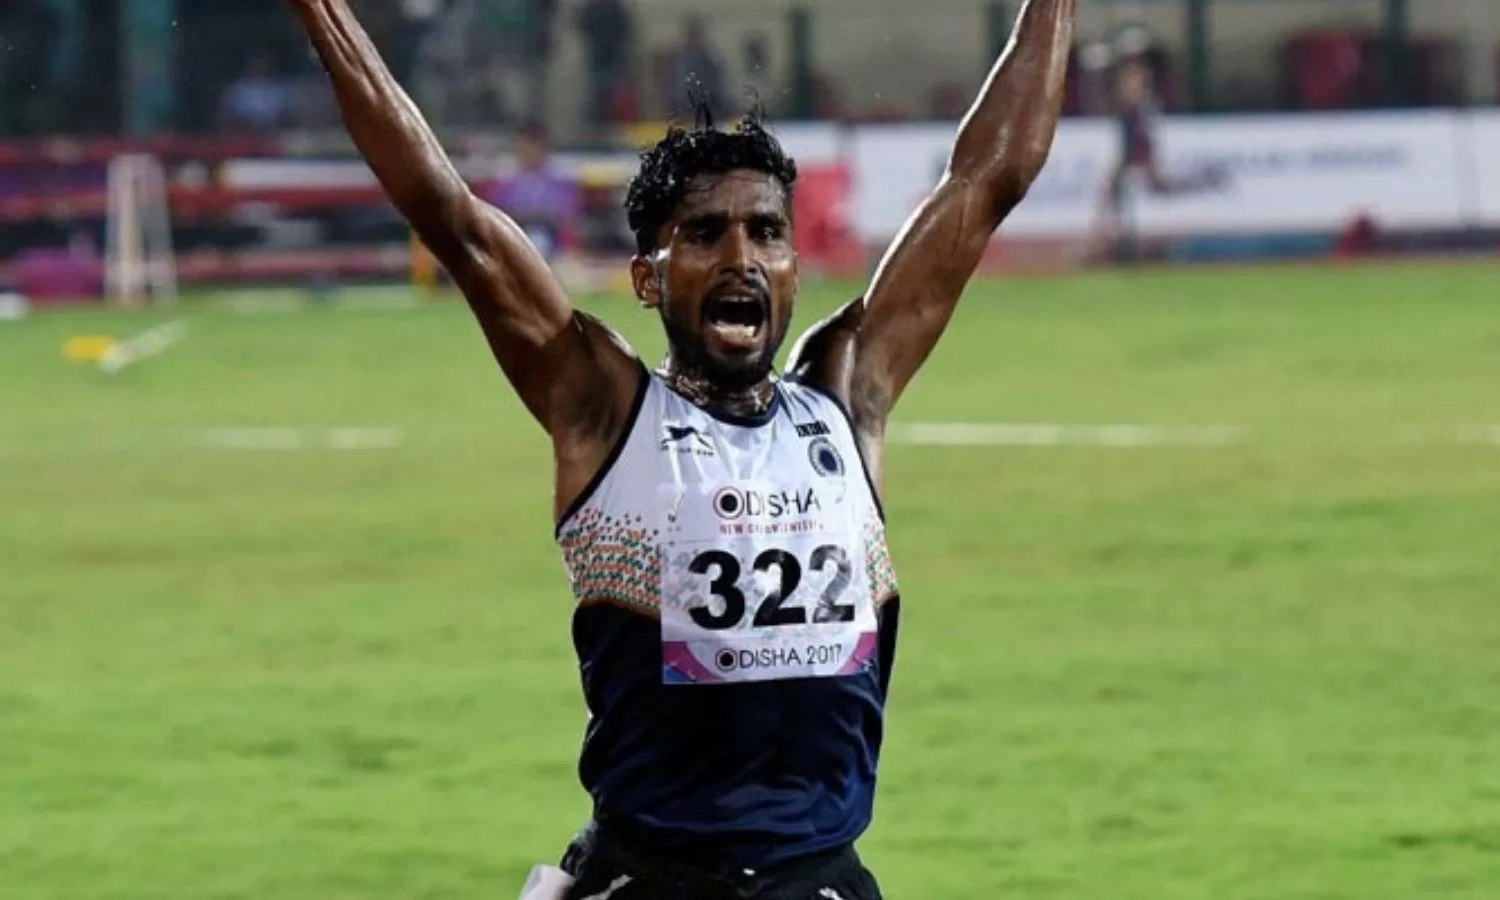 Indian runner G Lakshmanan banned for two years by NADA